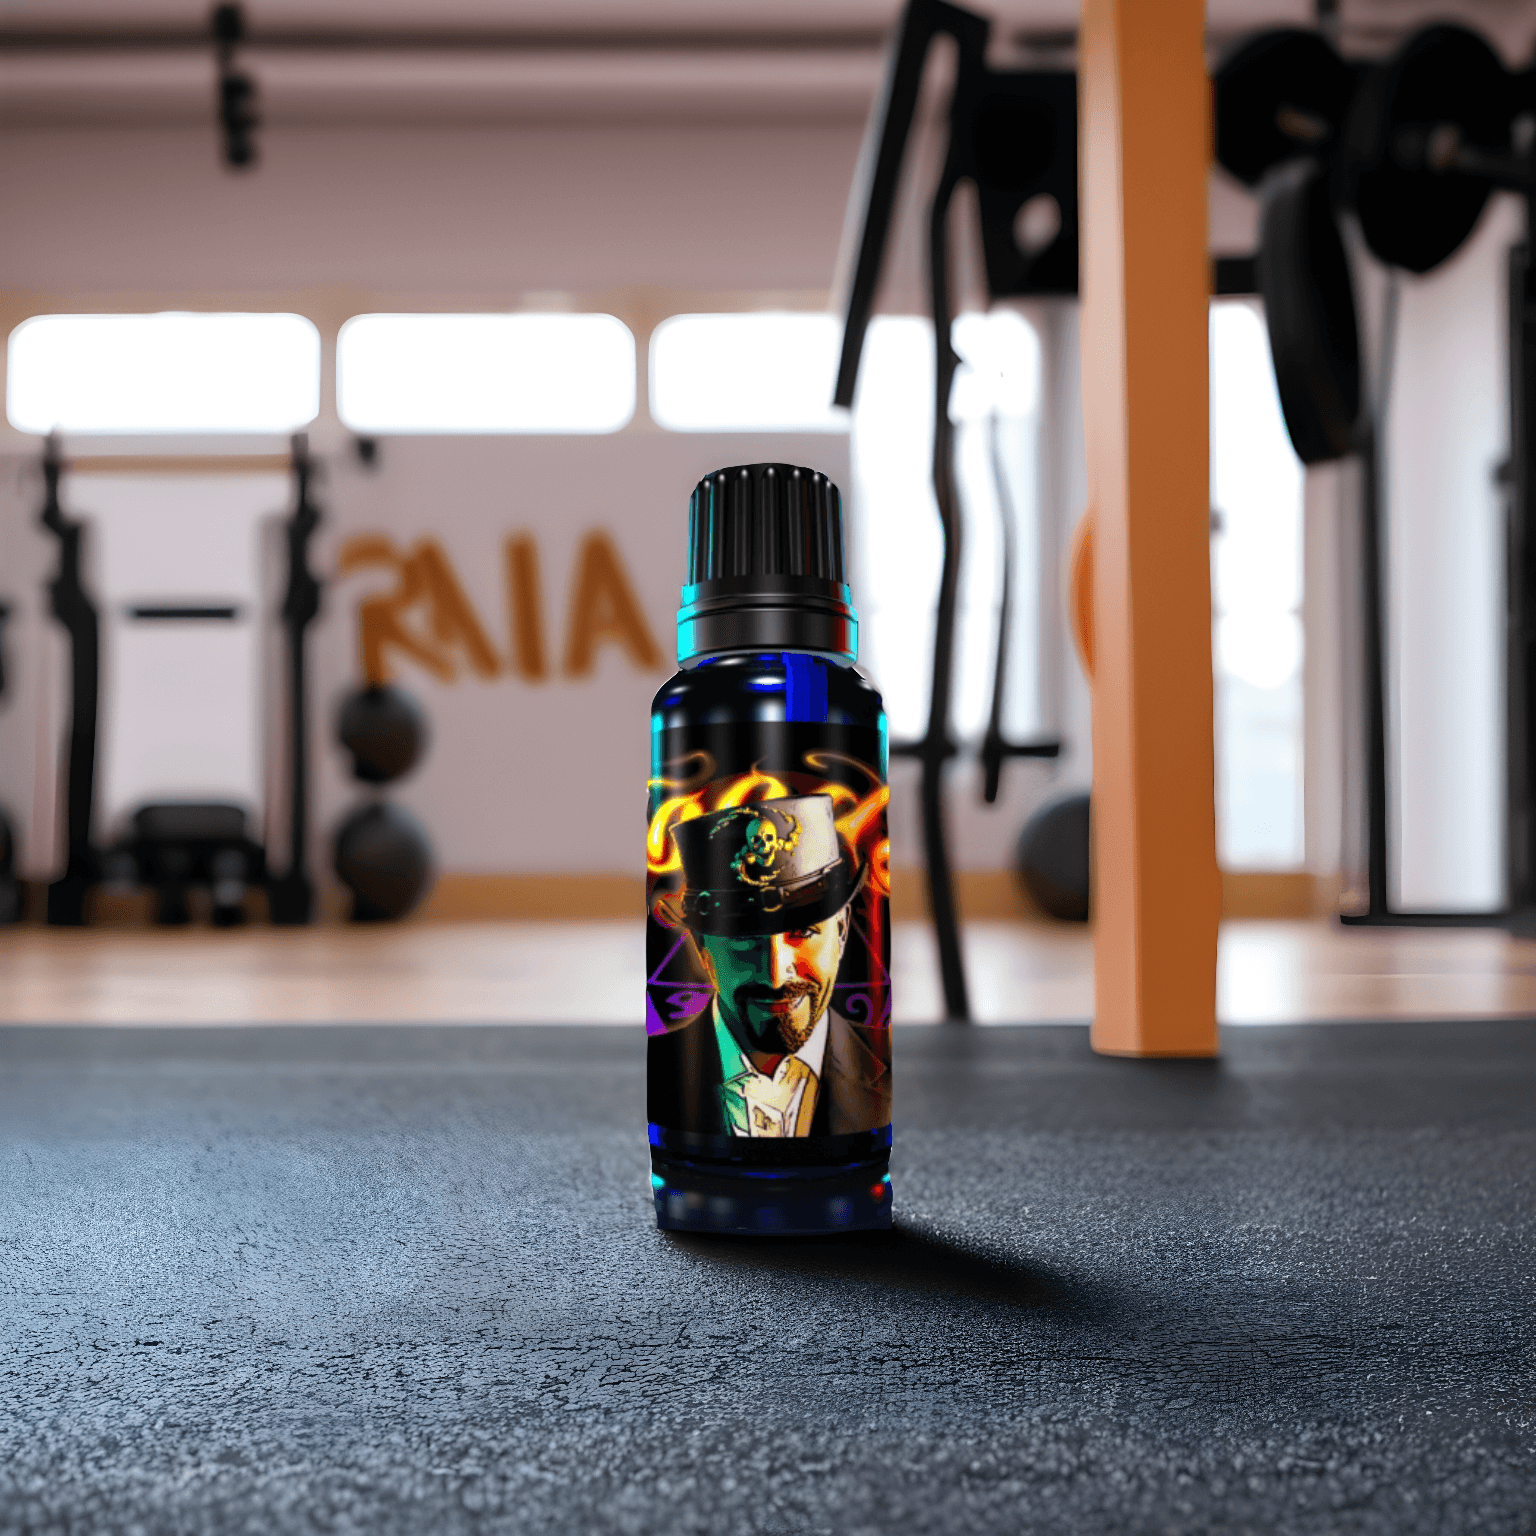 Voodoo Pheromone Cologne bottle on a gym floor with colorful, mystical-themed label, Royal Pheromones, Pheromone Perfumes, Pheromone Oil, Pheromone Colognes.